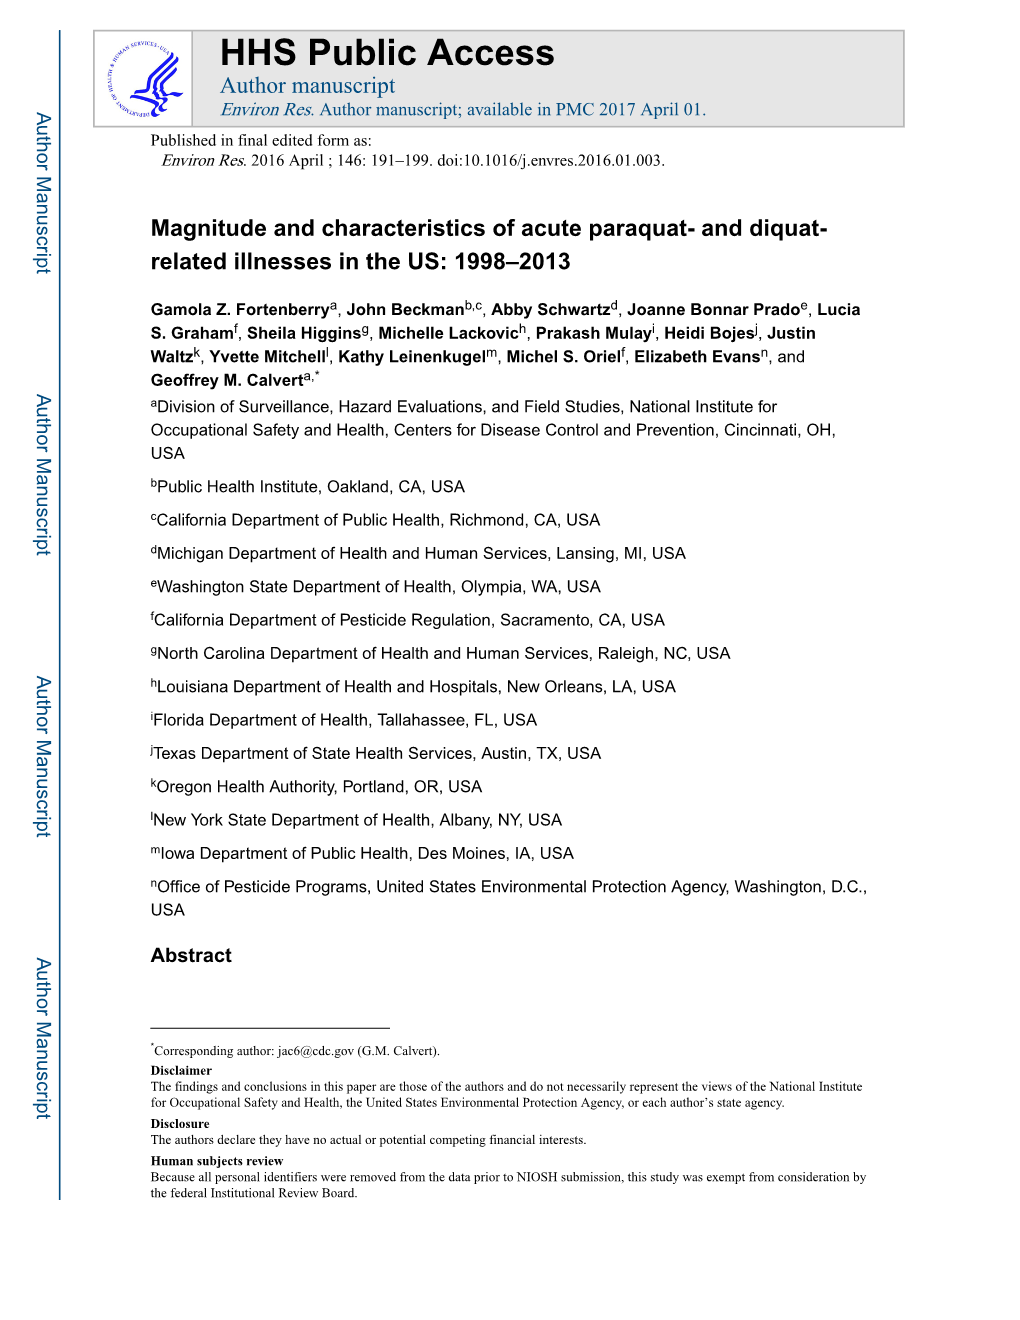 Magnitude and Characteristics of Acute Paraquat- and Diquat-Related Illnesses in the US